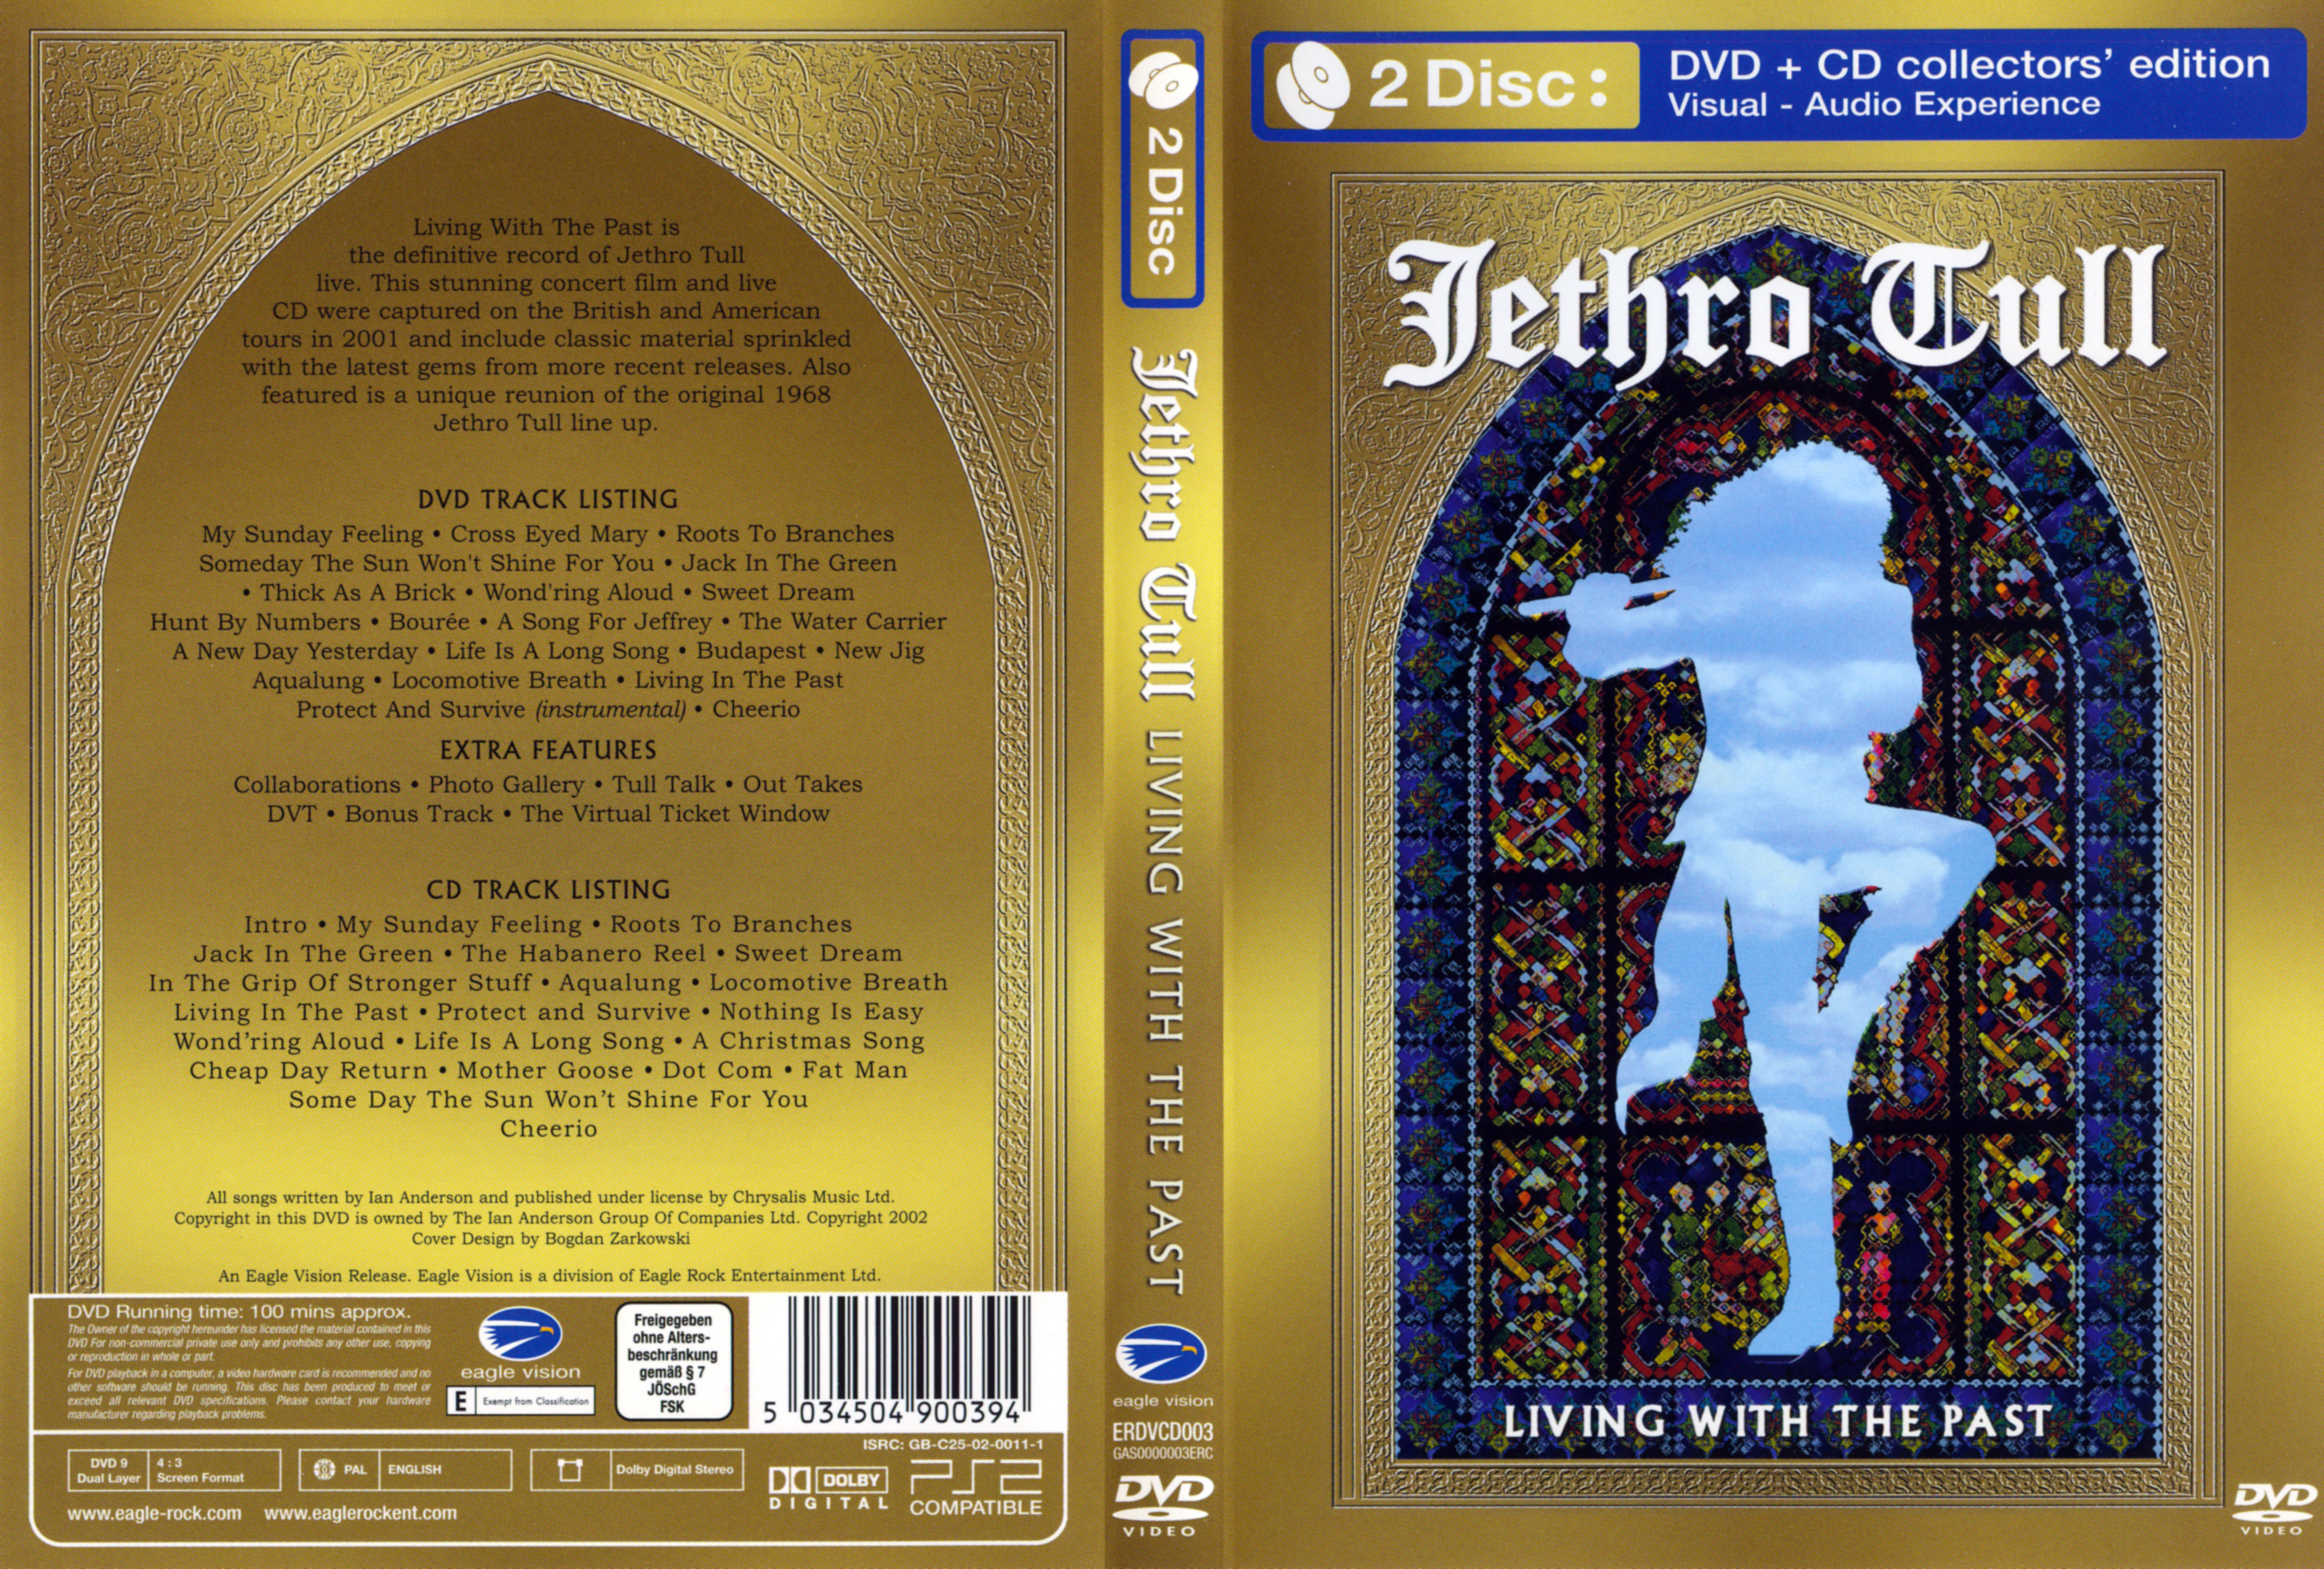 Jaquette DVD Jethro Tull Living with the past